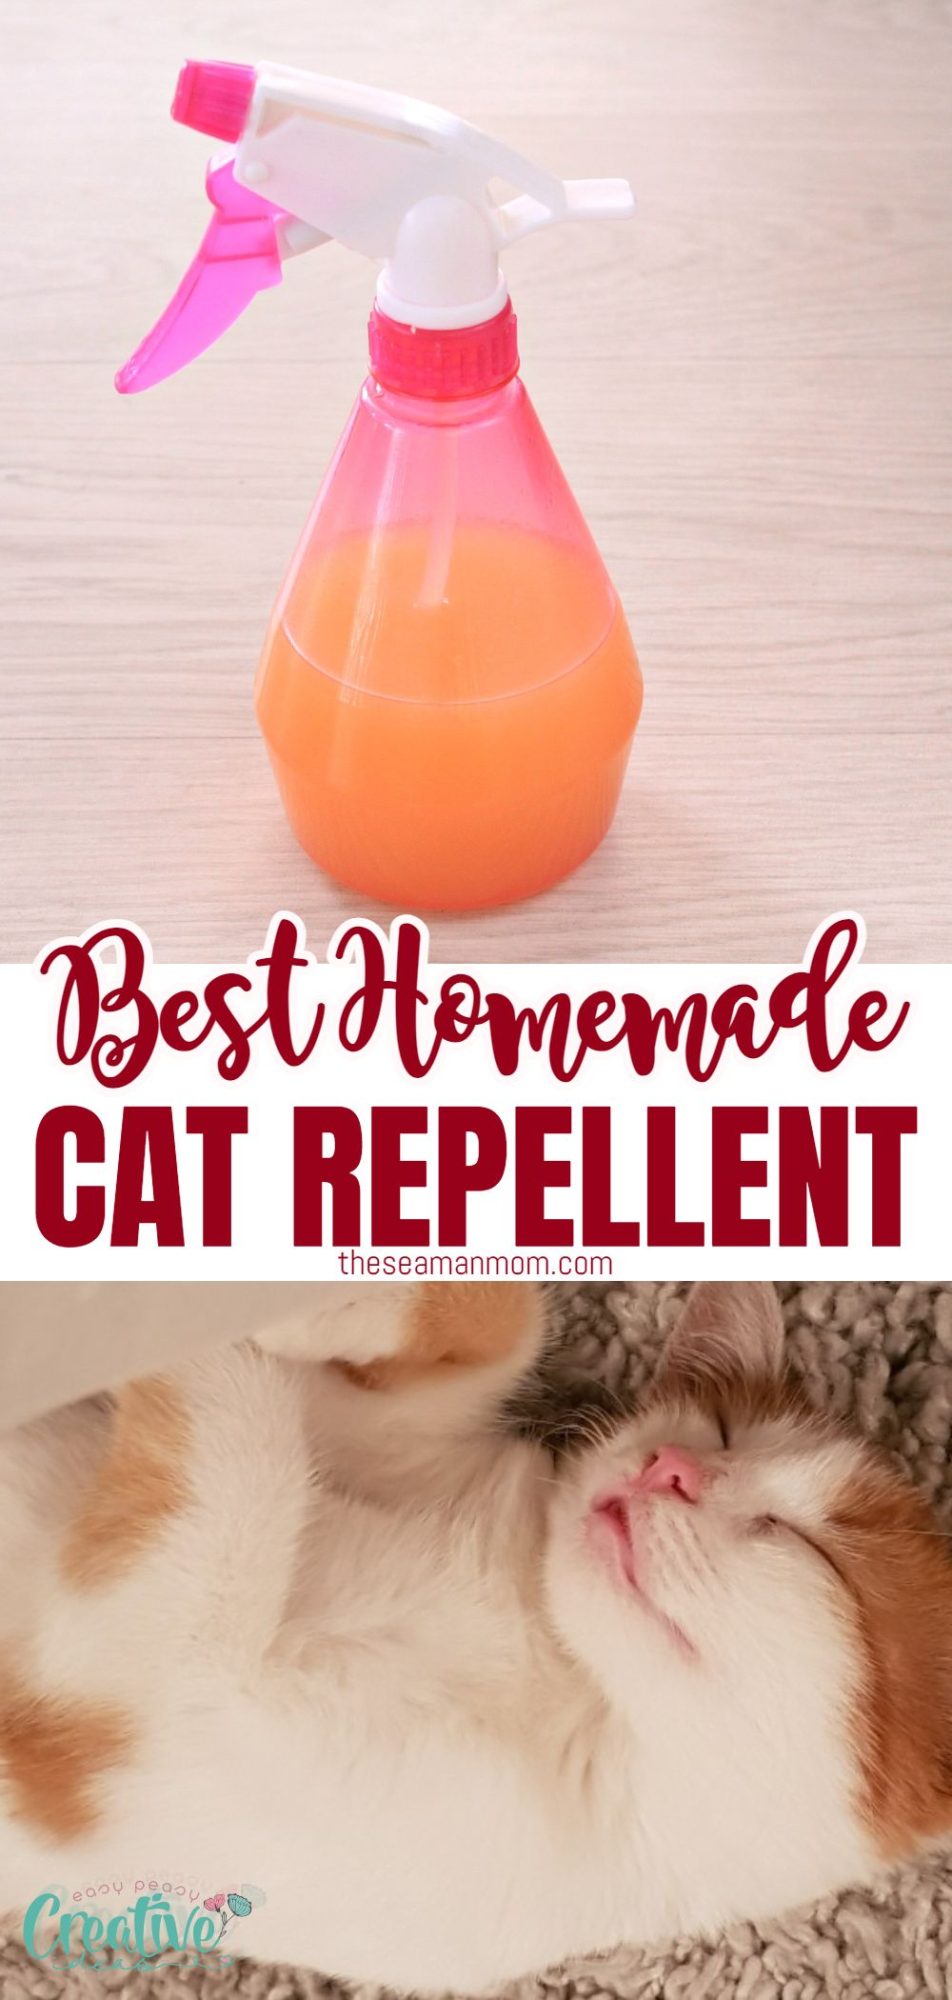 Photo collage featuring a DIY cat repellent spray and a sleeping cat